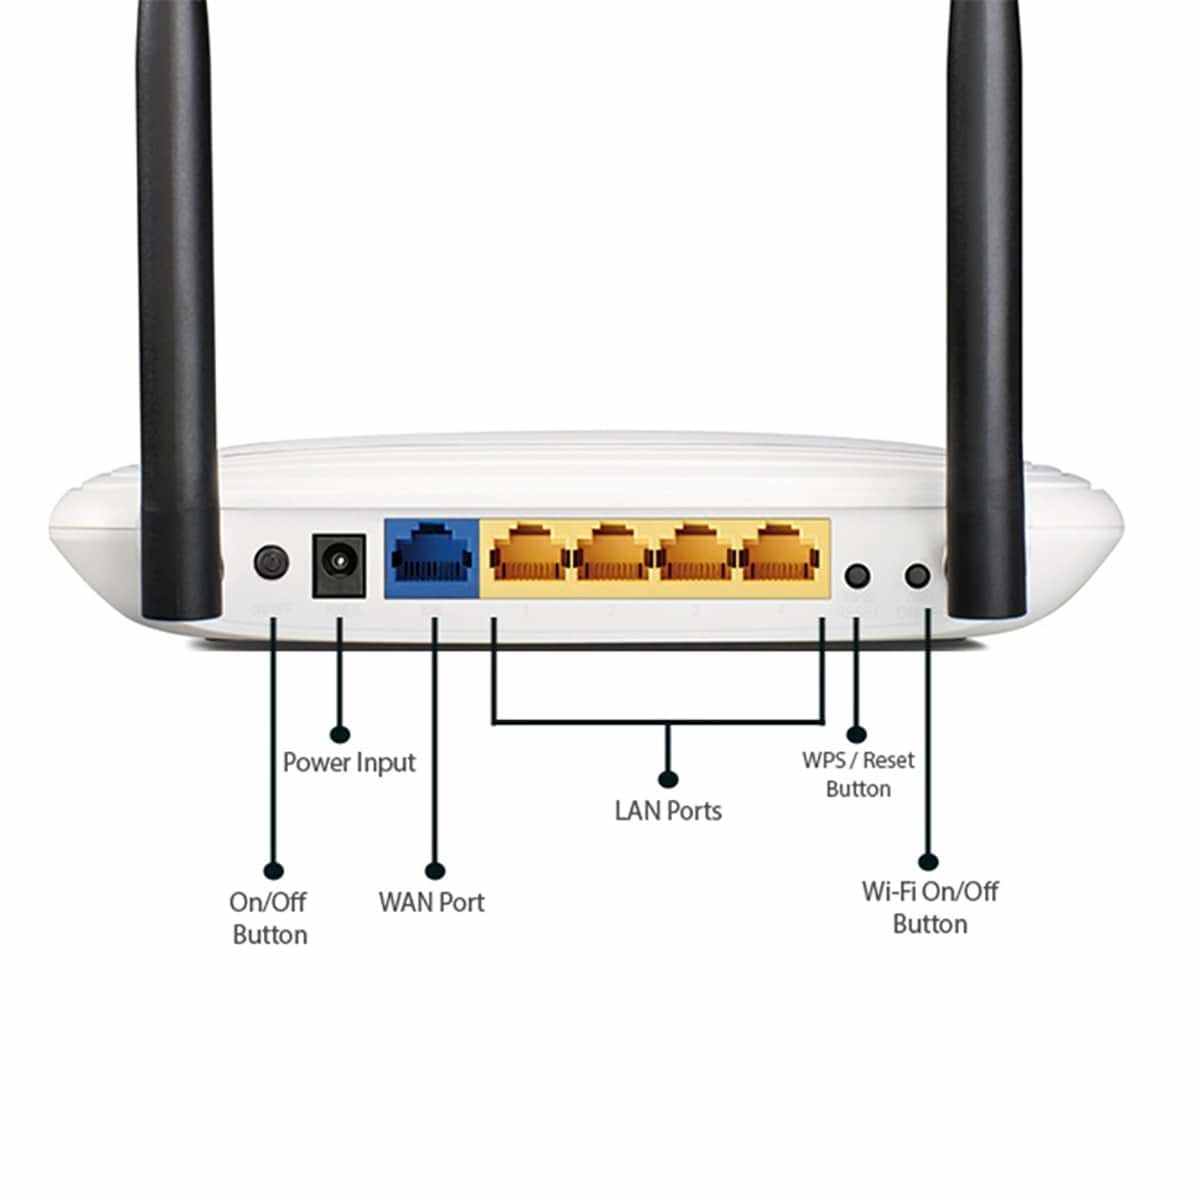 Malawi Face up Rarely Router Wireless N, TP-LINK, 2 antene, viteza 300 Mbps, Functie DMZ host -  eMAG.ro